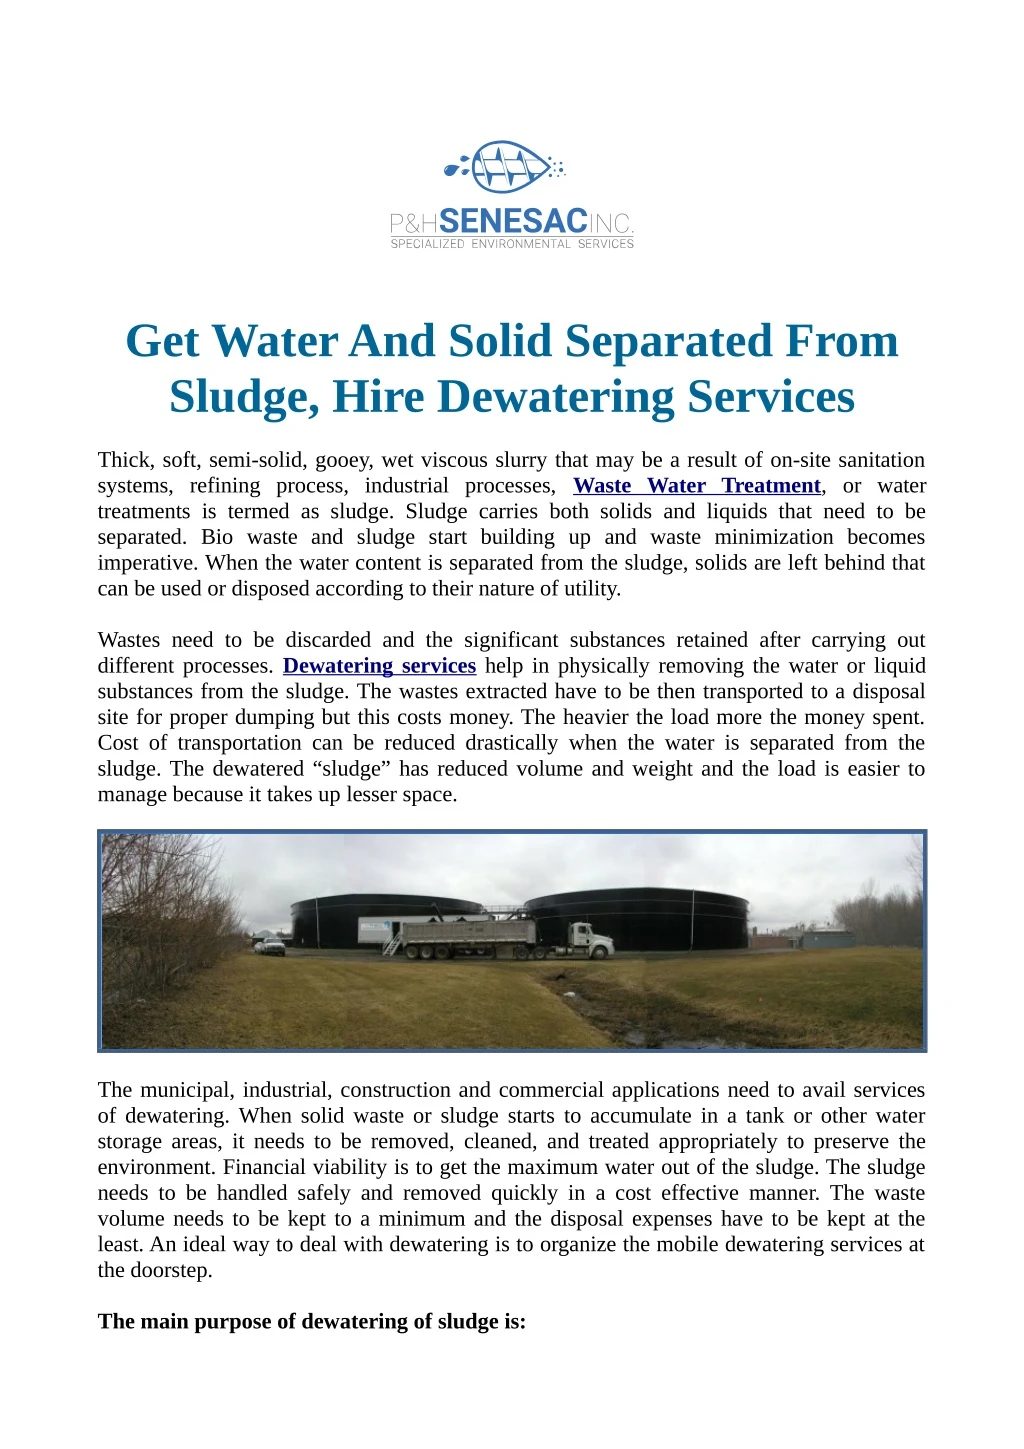 get water and solid separated from sludge hire